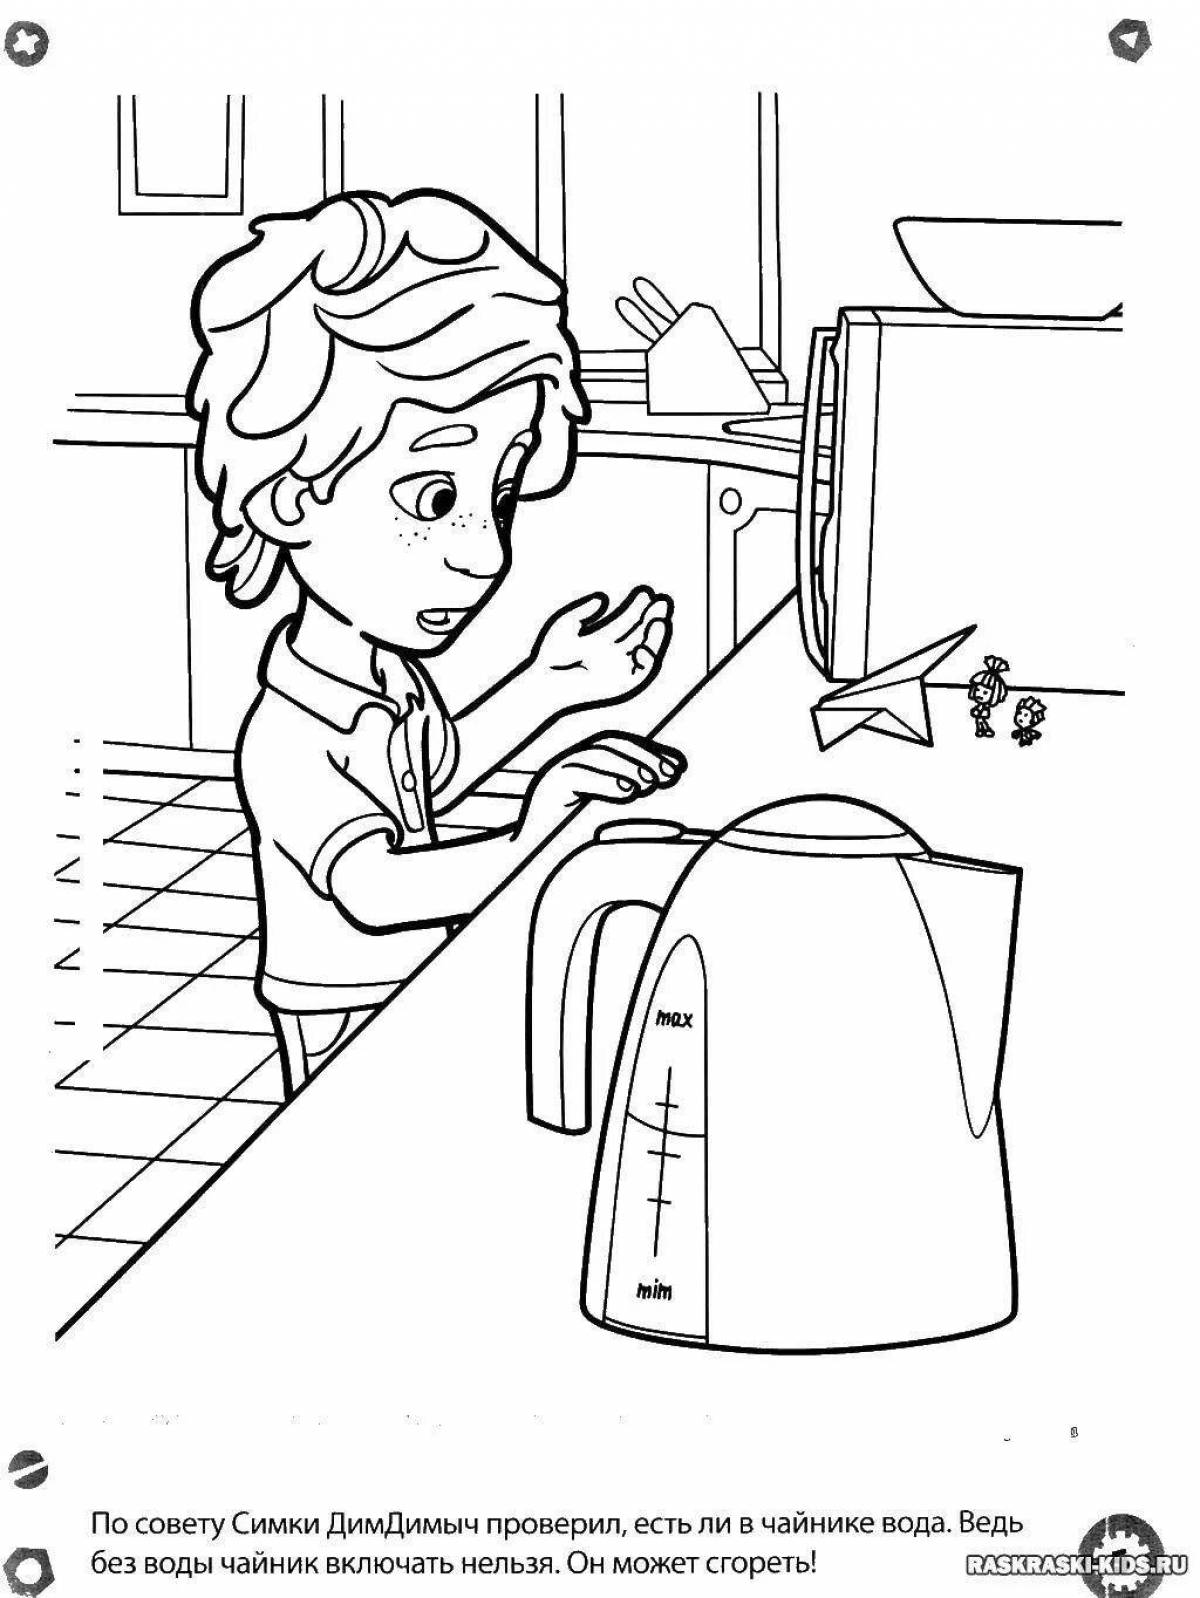 Home Alone Safety Coloring Page